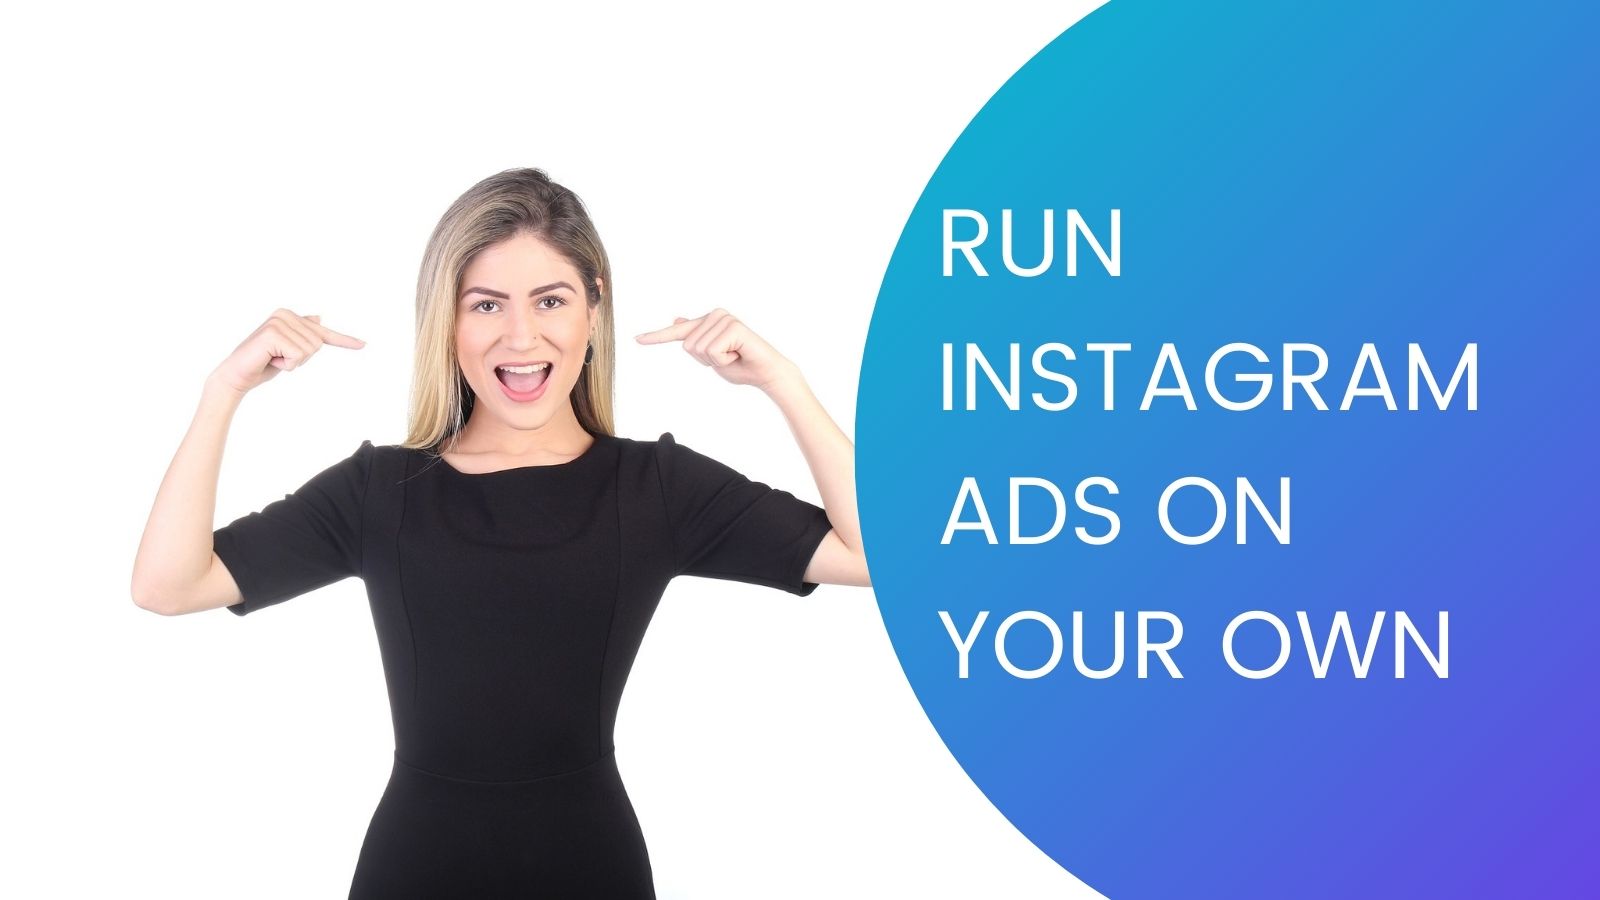 Run instagram ads on my own in 7 easy steps Get Marketing Fit